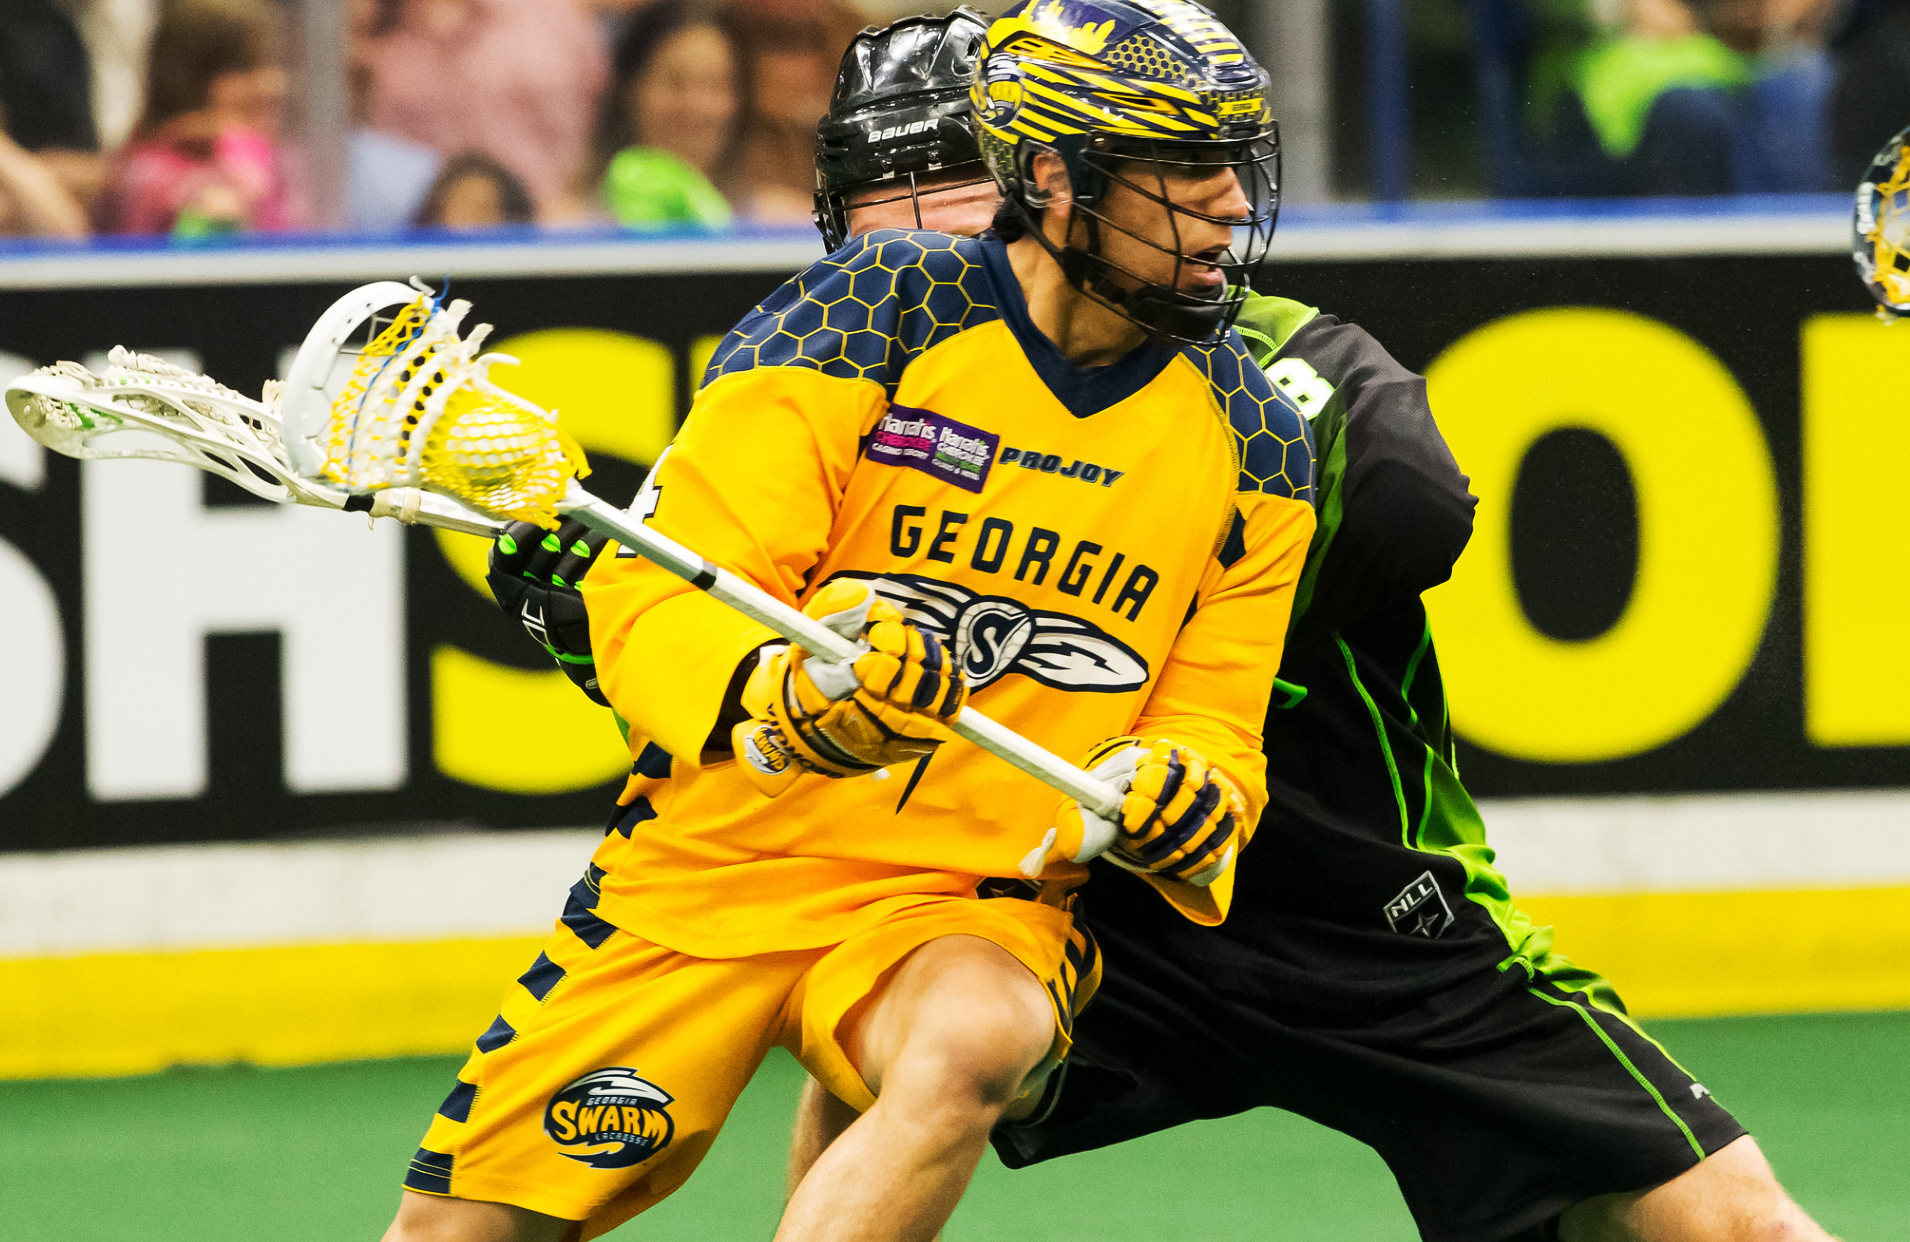 Lyle Thompson scores in tight to make it 6-5